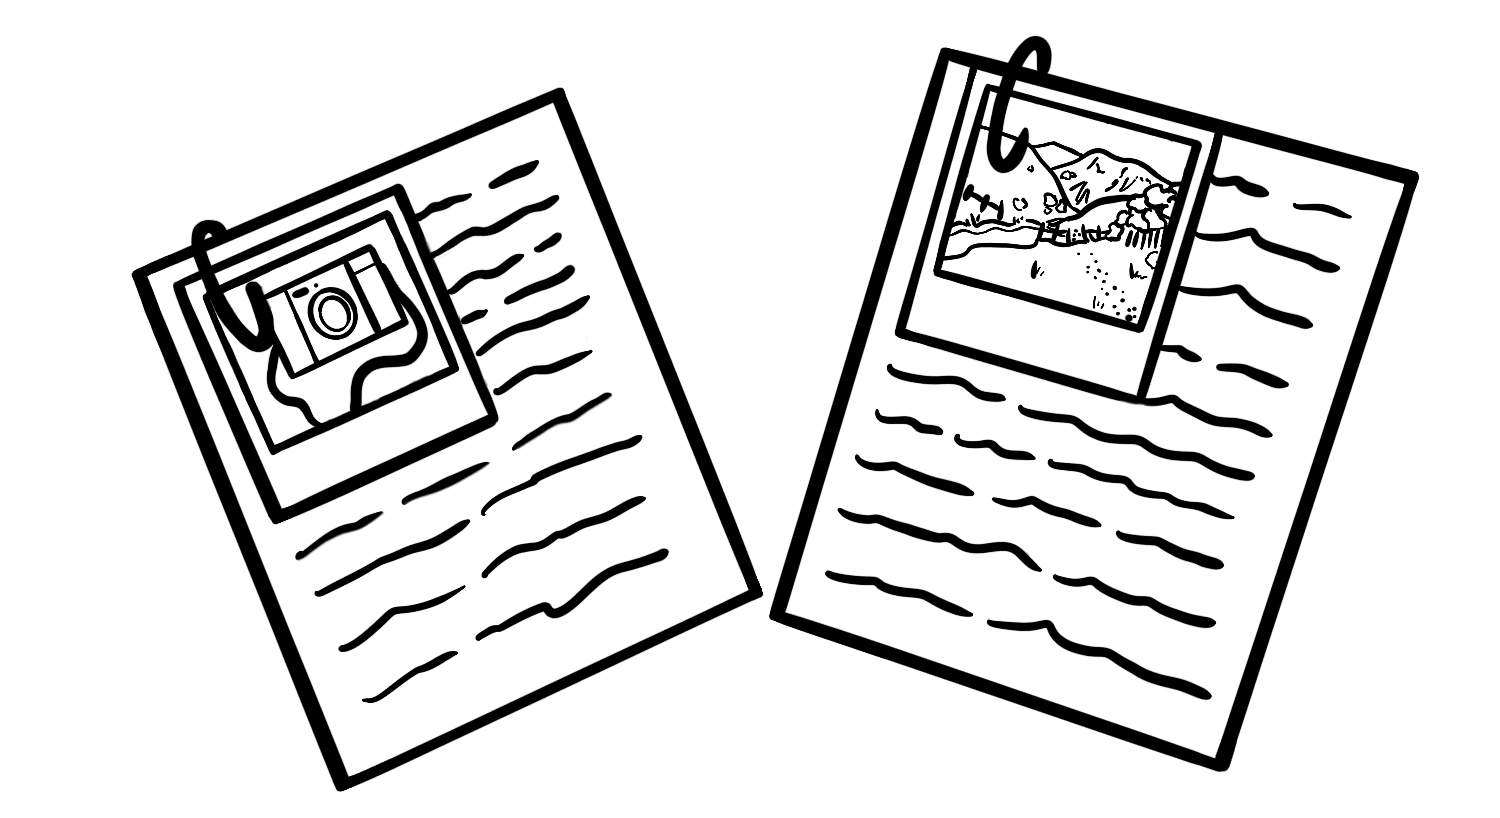 Illustration: Two documents with photos paper clipped on each one, representing descriptions of the images. One photo is of a point-and-shoot camera, the other is of a meadow with a pathway.